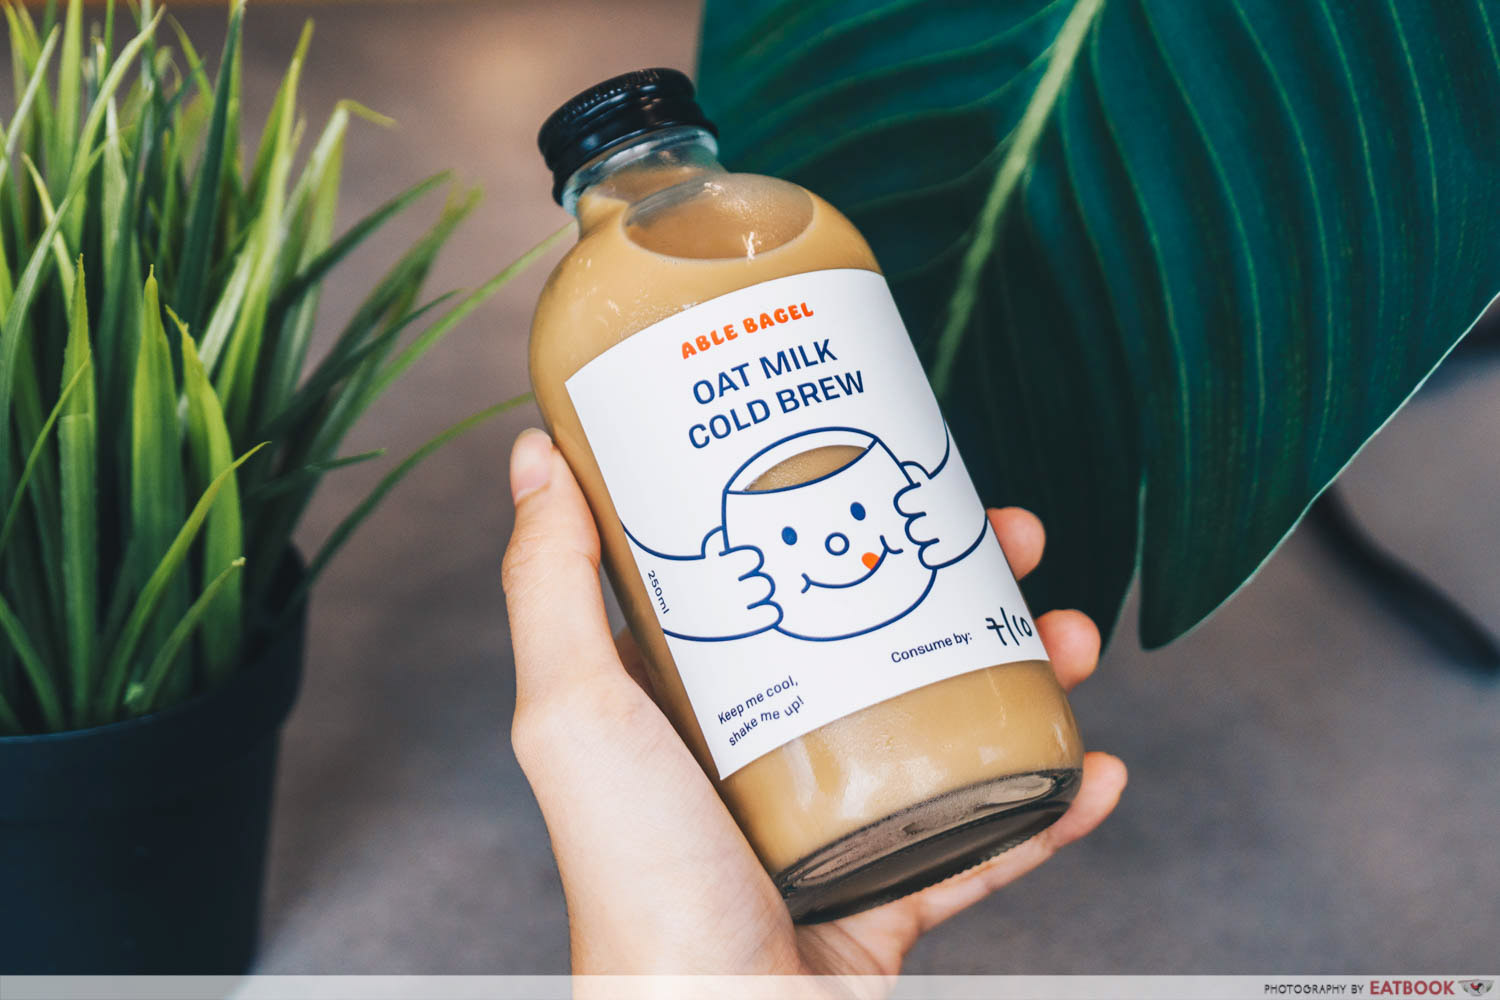 able bagel - oat milk cold brew